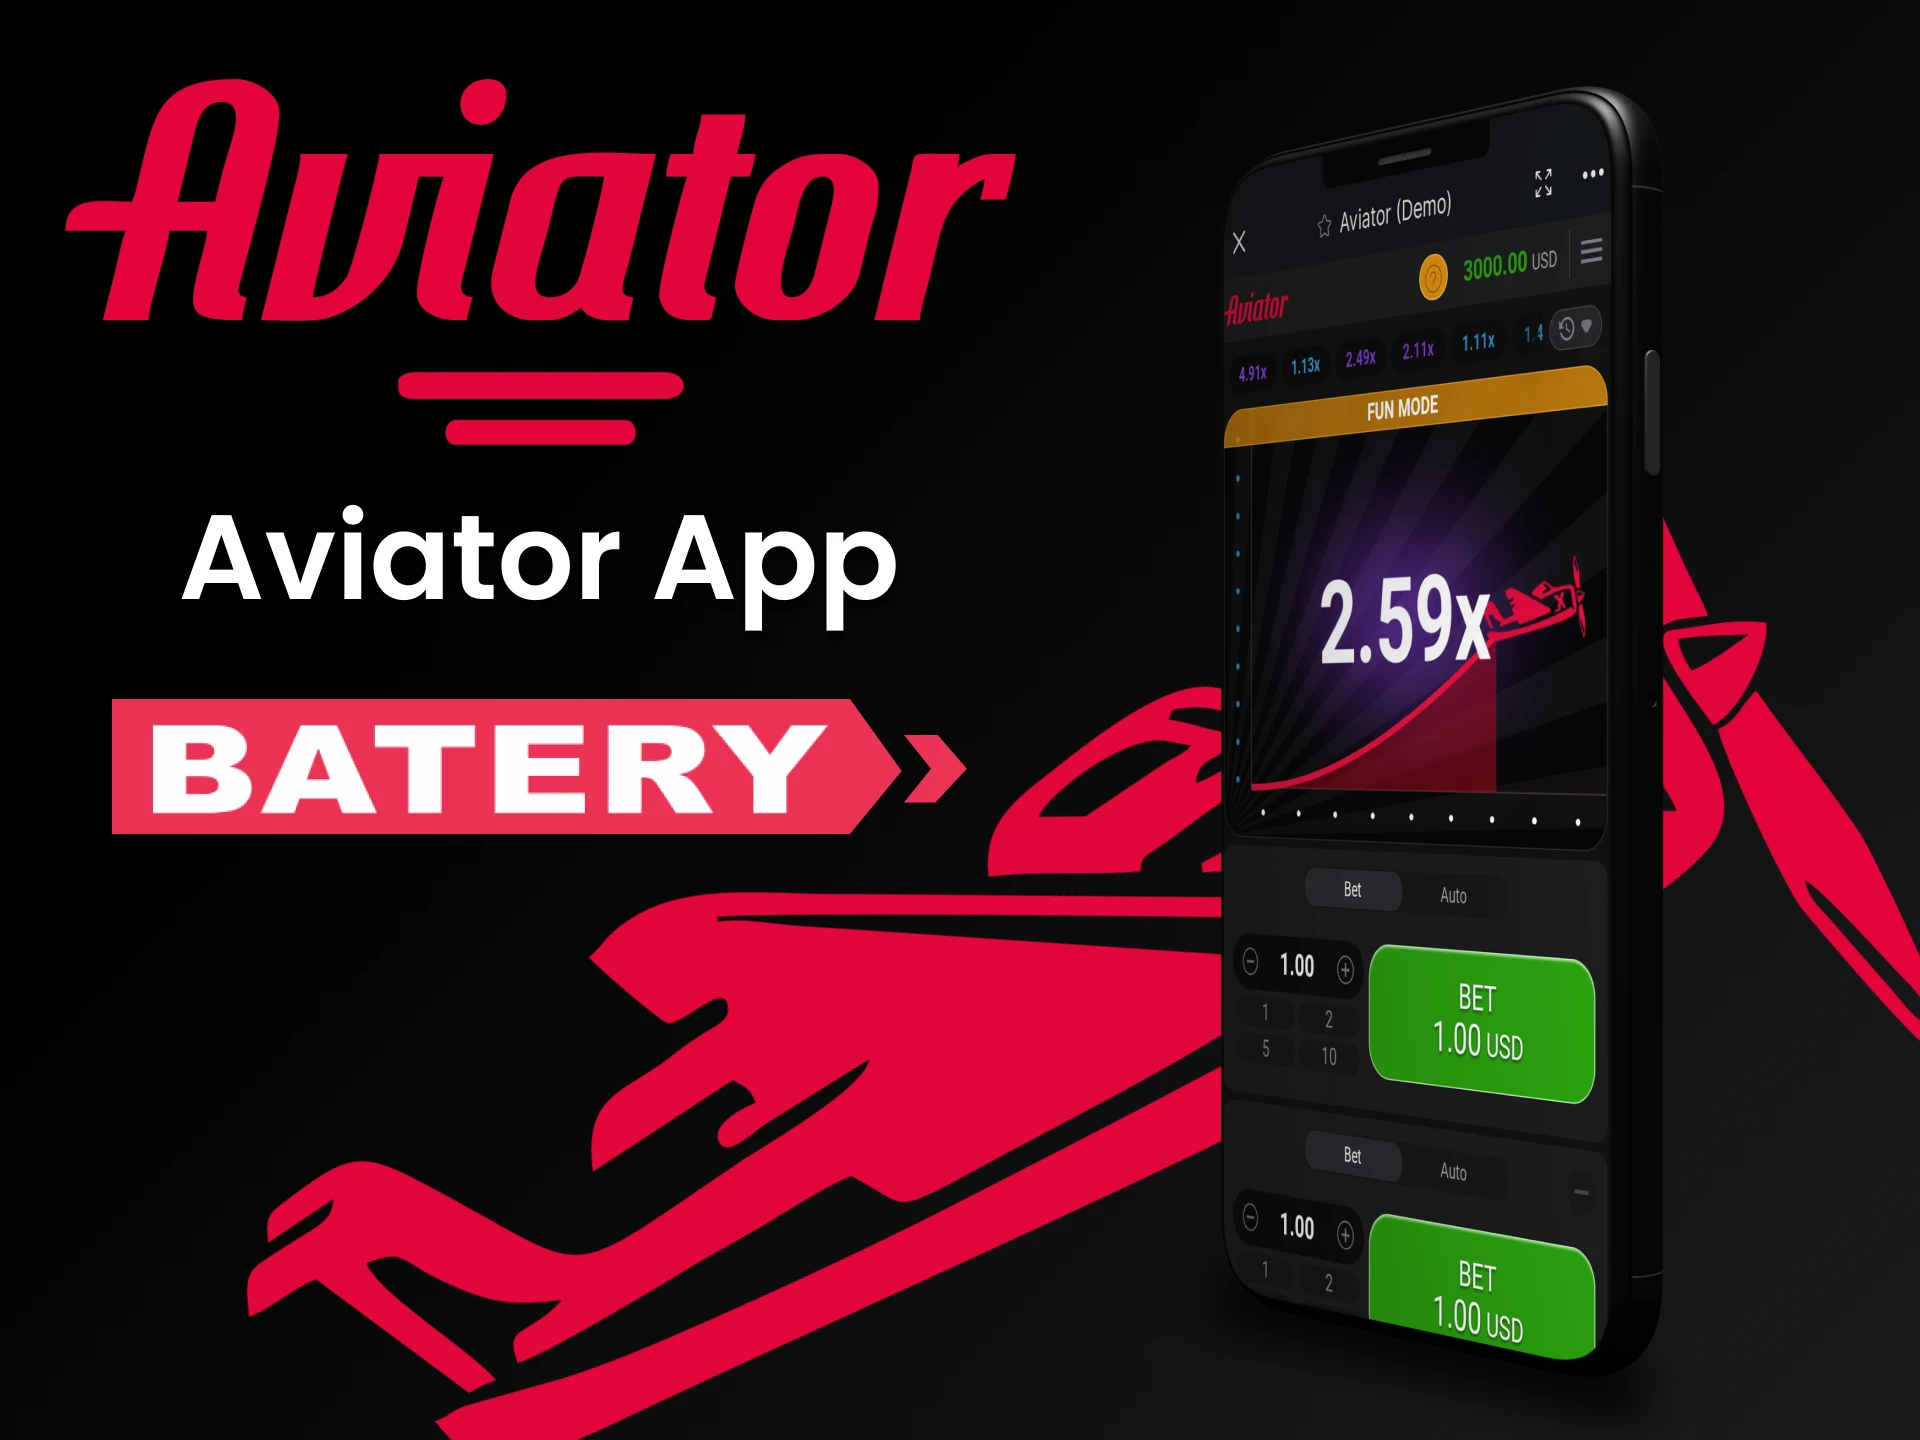 To play Aviator, choose the Batery app.